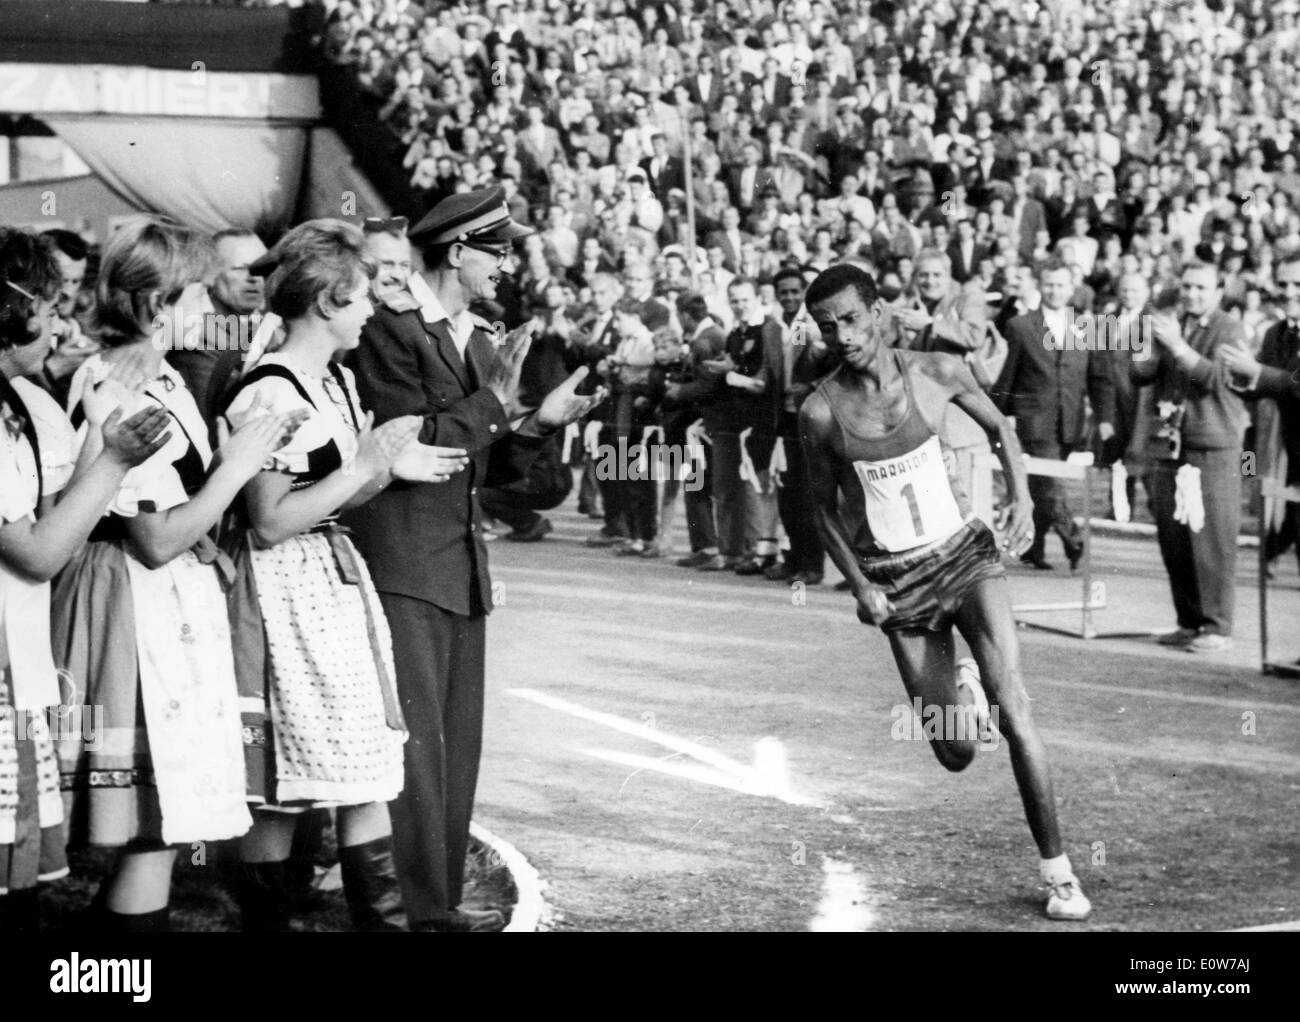 Oct 11, 1961; Kosice, Czechoslovakia; The 31st. annual International Peace Marathon took place last weekend in the East Slovak town of Kosice, Czechoslovakia. The event was won by BIKILA ABEBE of Ethiopia, with second Dr. Pavel Kantorek (CSSR) and in third place the Japanese long distance runner Nakao. In the picture, the winner Bikila Abebe arrives at the 'Locomotive' Stadium at the end of the event. Stock Photo